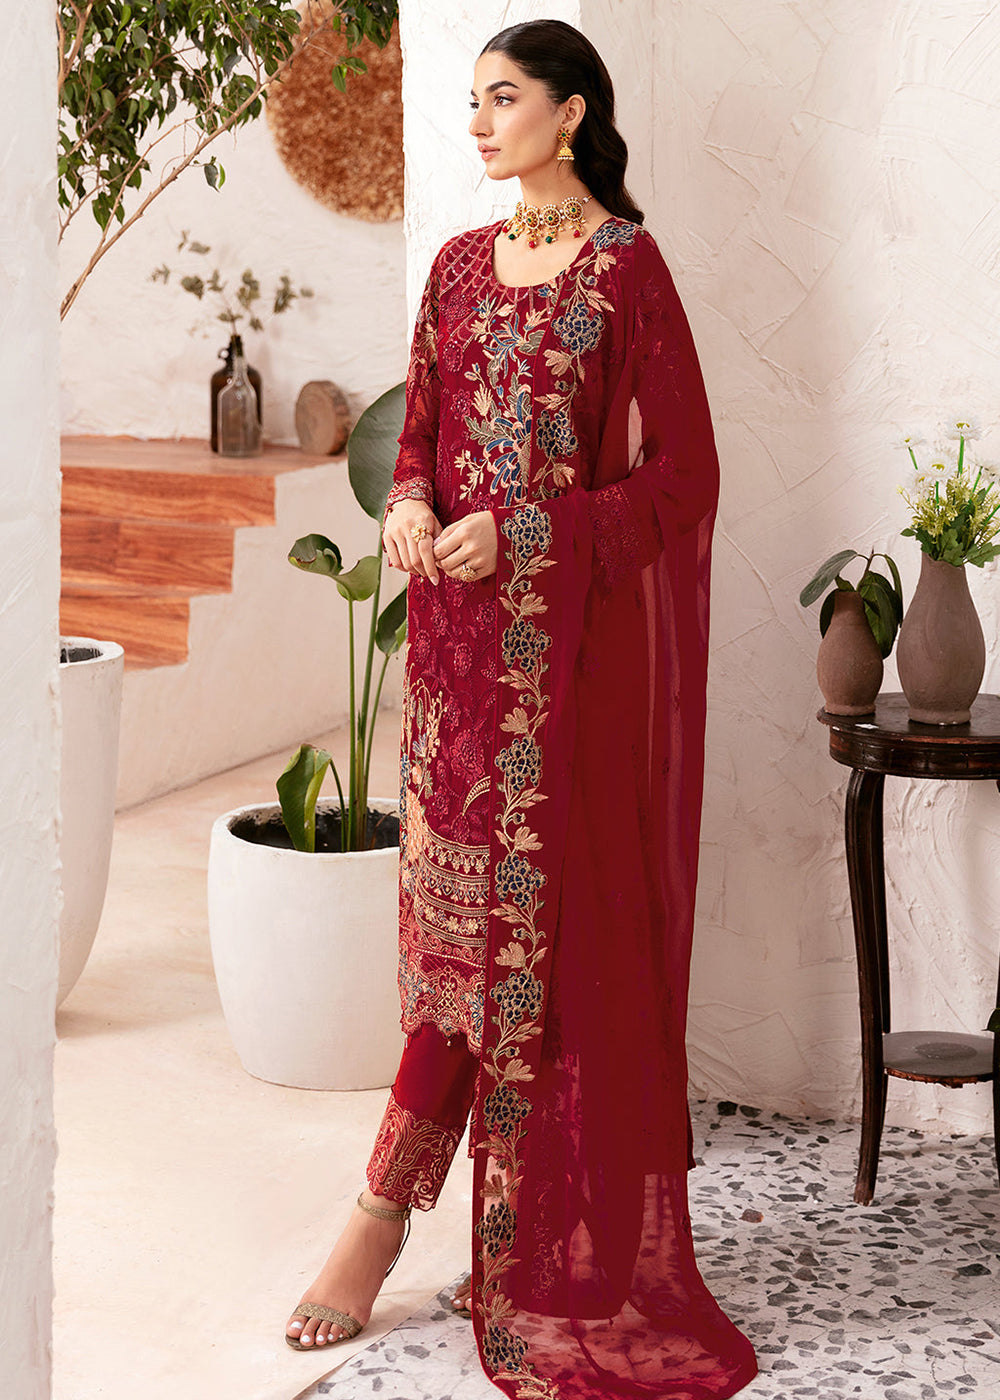 Buy Now Rangoon Chiffon Collection 24 by Ramsha | D-1205 Online at Empress in USA, UK, Canada, Germany, Italy, Dubai & Worldwide at Empress Clothing.